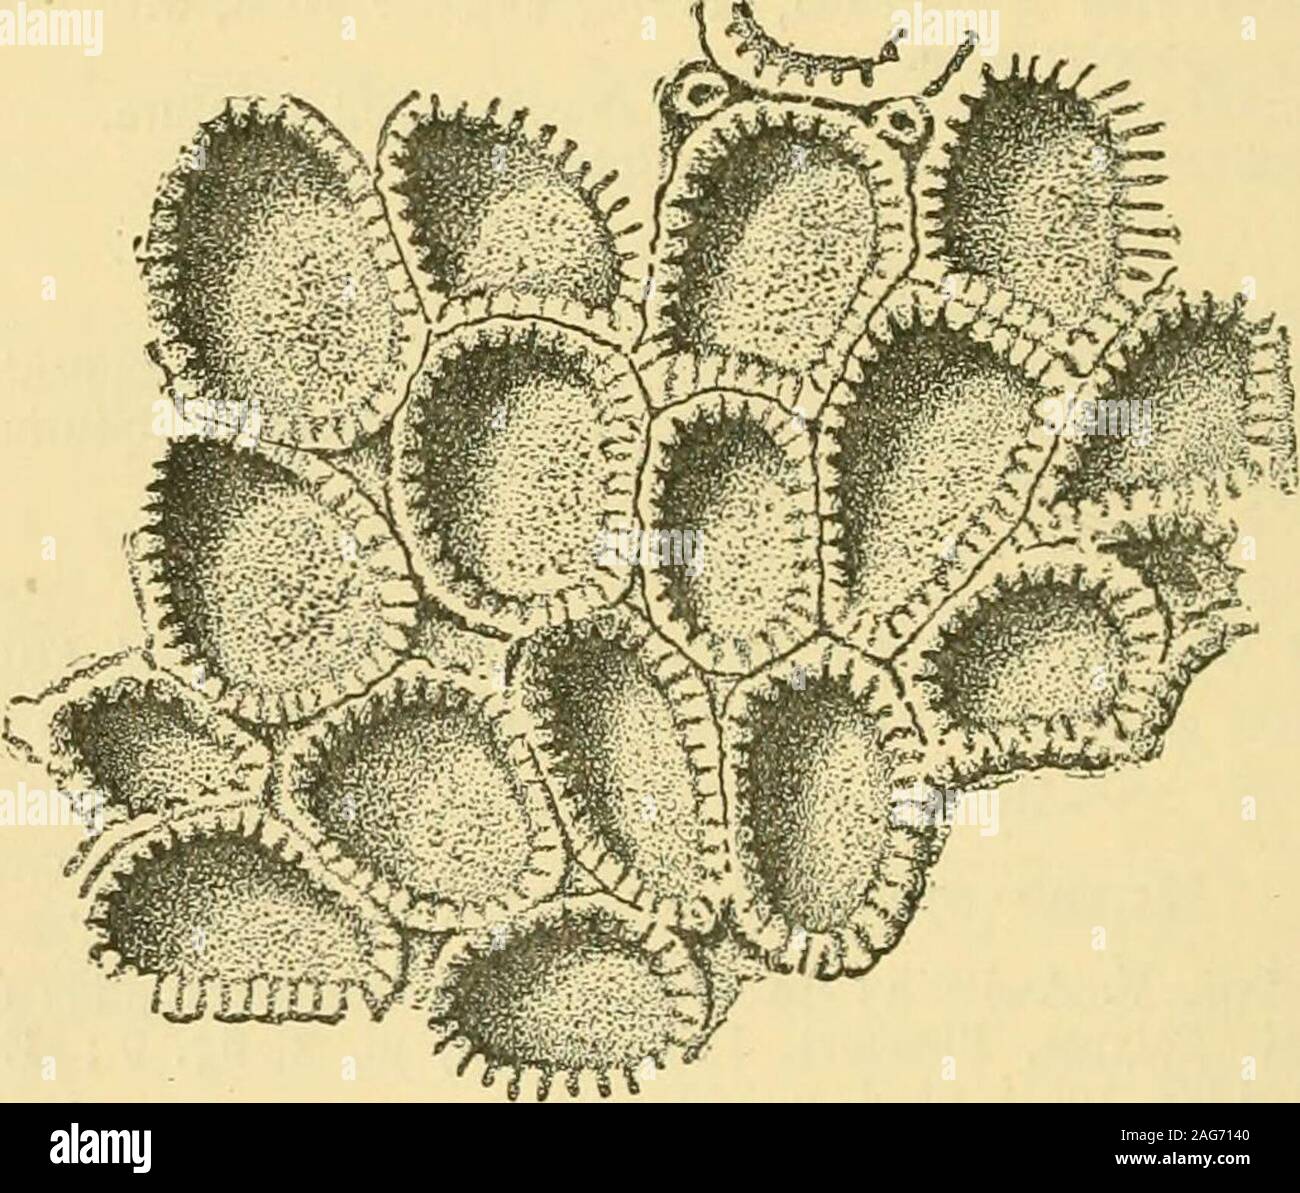 . Geological magazine. ly triangular, situate inthe anterior angles of the space between the zocecial walls, sparselydeveloped. 304 H. W. Burrows—A Bryozoan from Mekran Coast. The colony under description is attached to the apical whorls ofa Neptimea, closely allied to the Crag N. jugosa (S. V. Wood), andwhich was found enclosed in one of the Mekran nodules. The zooecia are rather distorted and crowded together as theyaccommodate themselves to the sutures and ridges of the molluscon which they have grown. The mature zooecia measure about0*20 by 033 mm., and are almost quadrangular, with slight Stock Photo